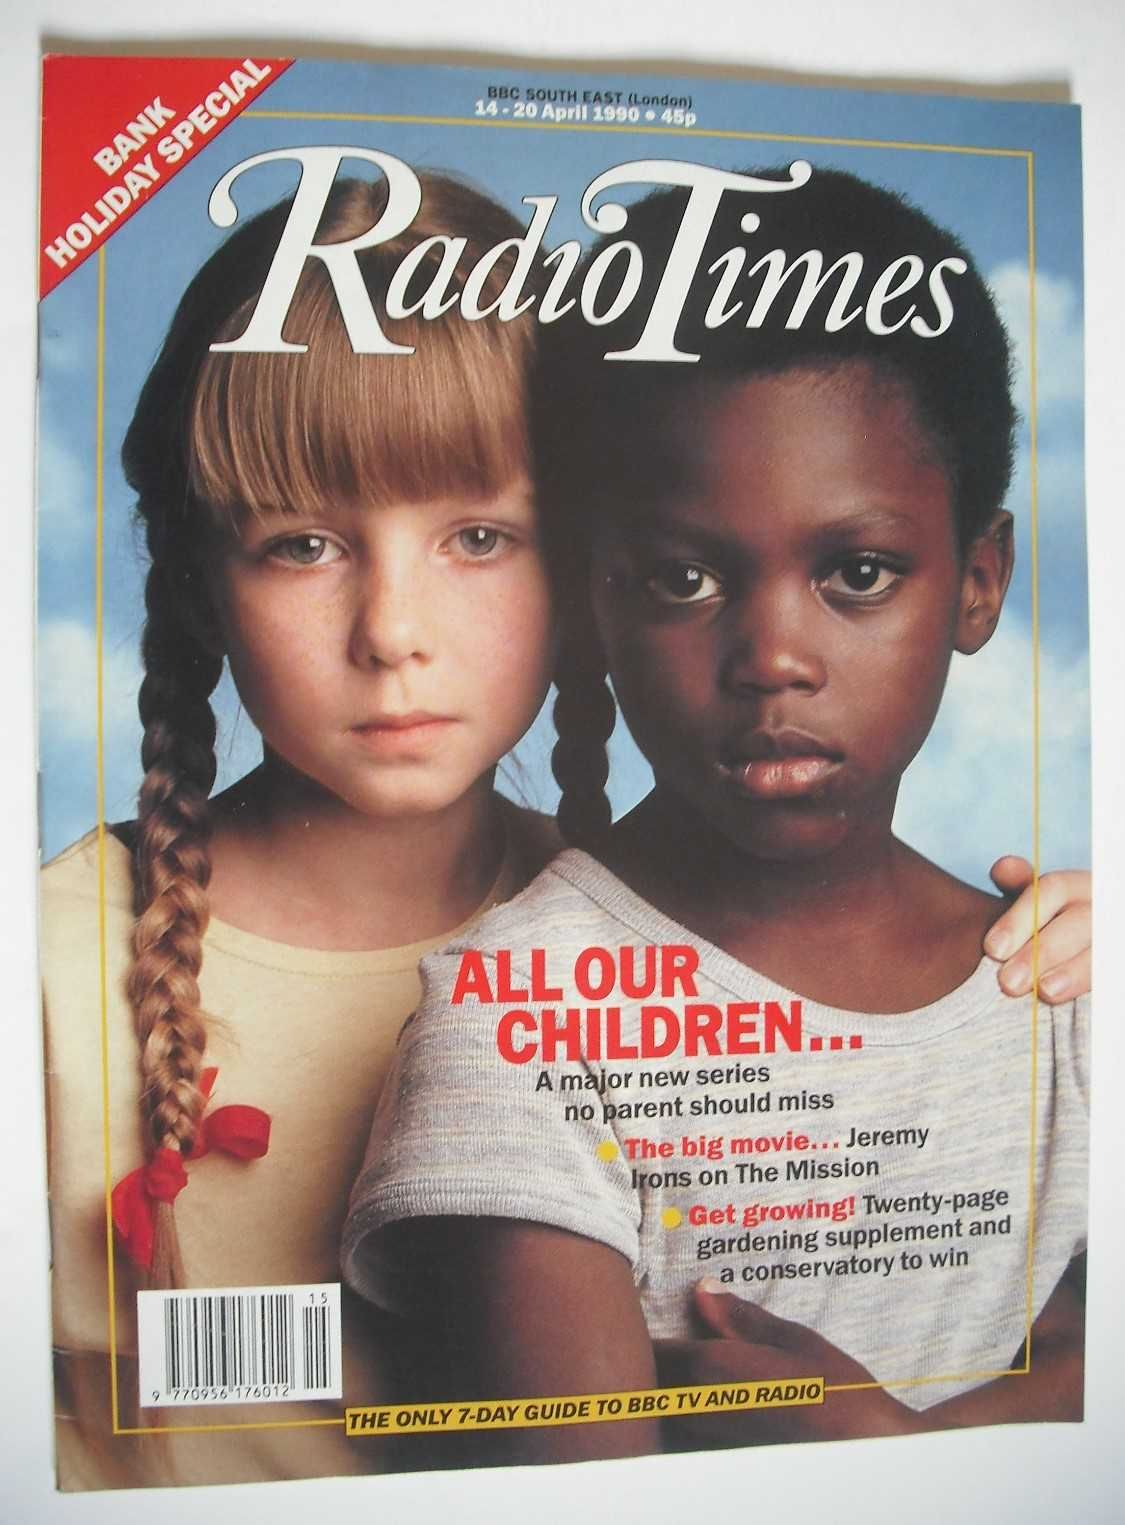 <!--1990-04-14-->Radio Times magazine - All Our Children cover (14-20 April